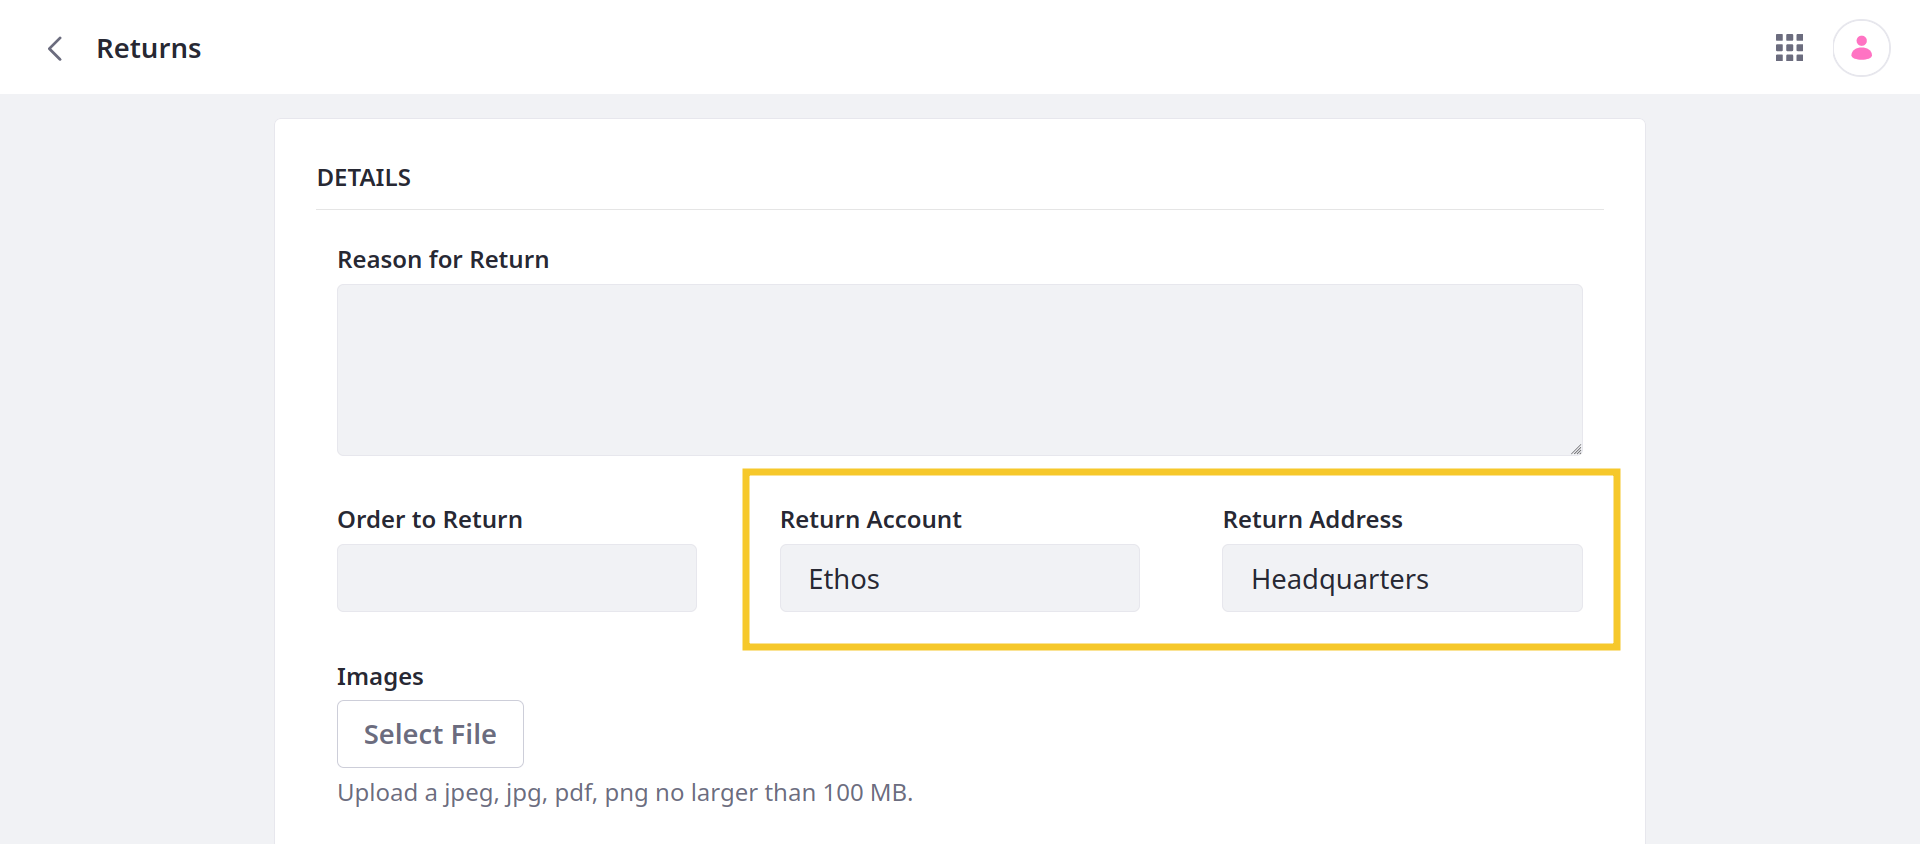 Users can select from available accounts and addresses in the custom object.